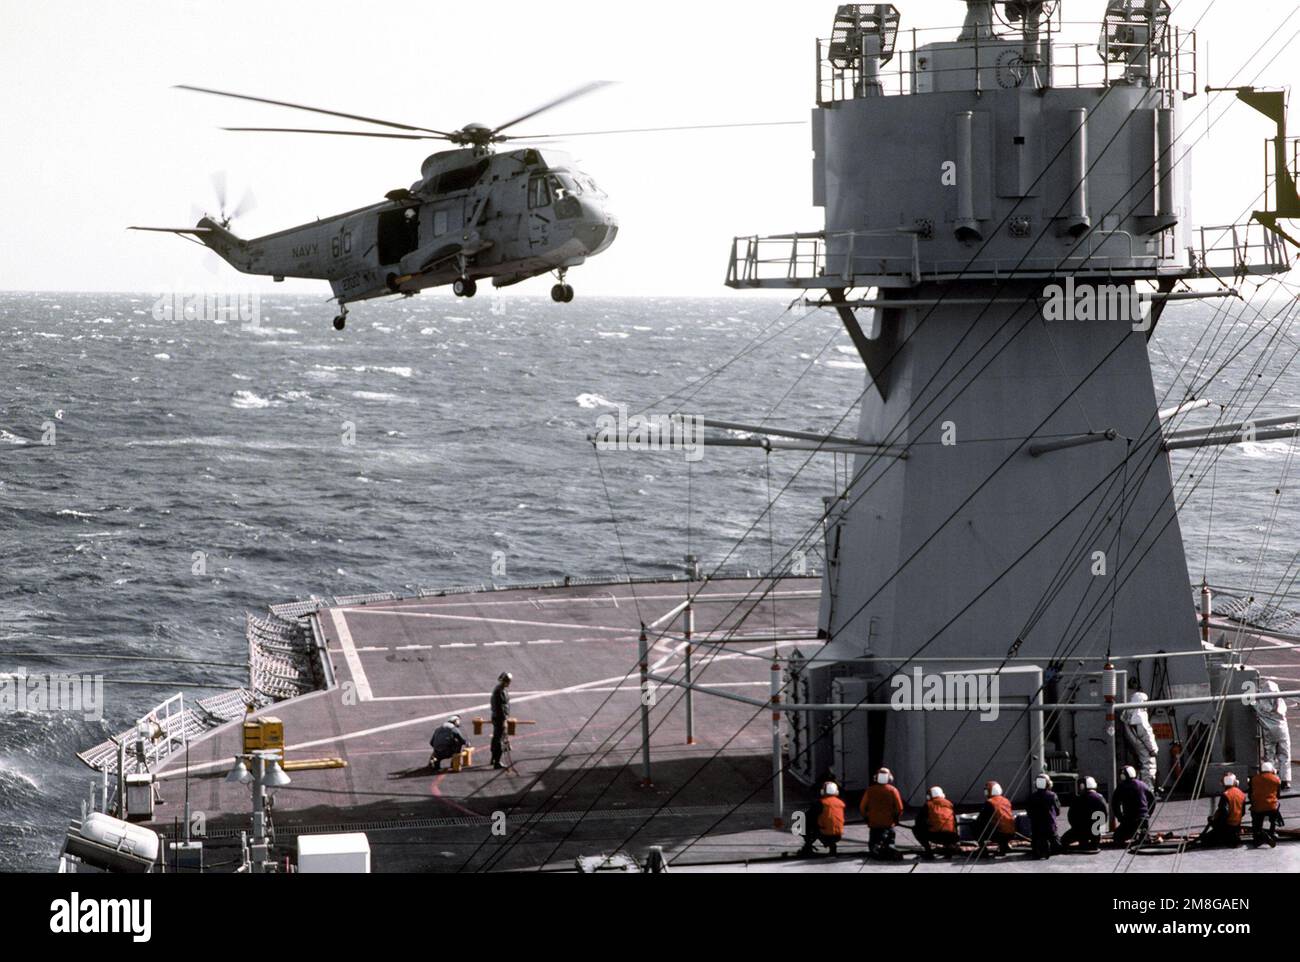 An SH-3 Sea King helicopter prepares to land aboard the amphibious command ship USS BLUE RIDGE (LCC-19) as the vessel is underway. The BLUE RIDGE is the flagship of commander, 7th Fleet. Country: South China Sea Stock Photo